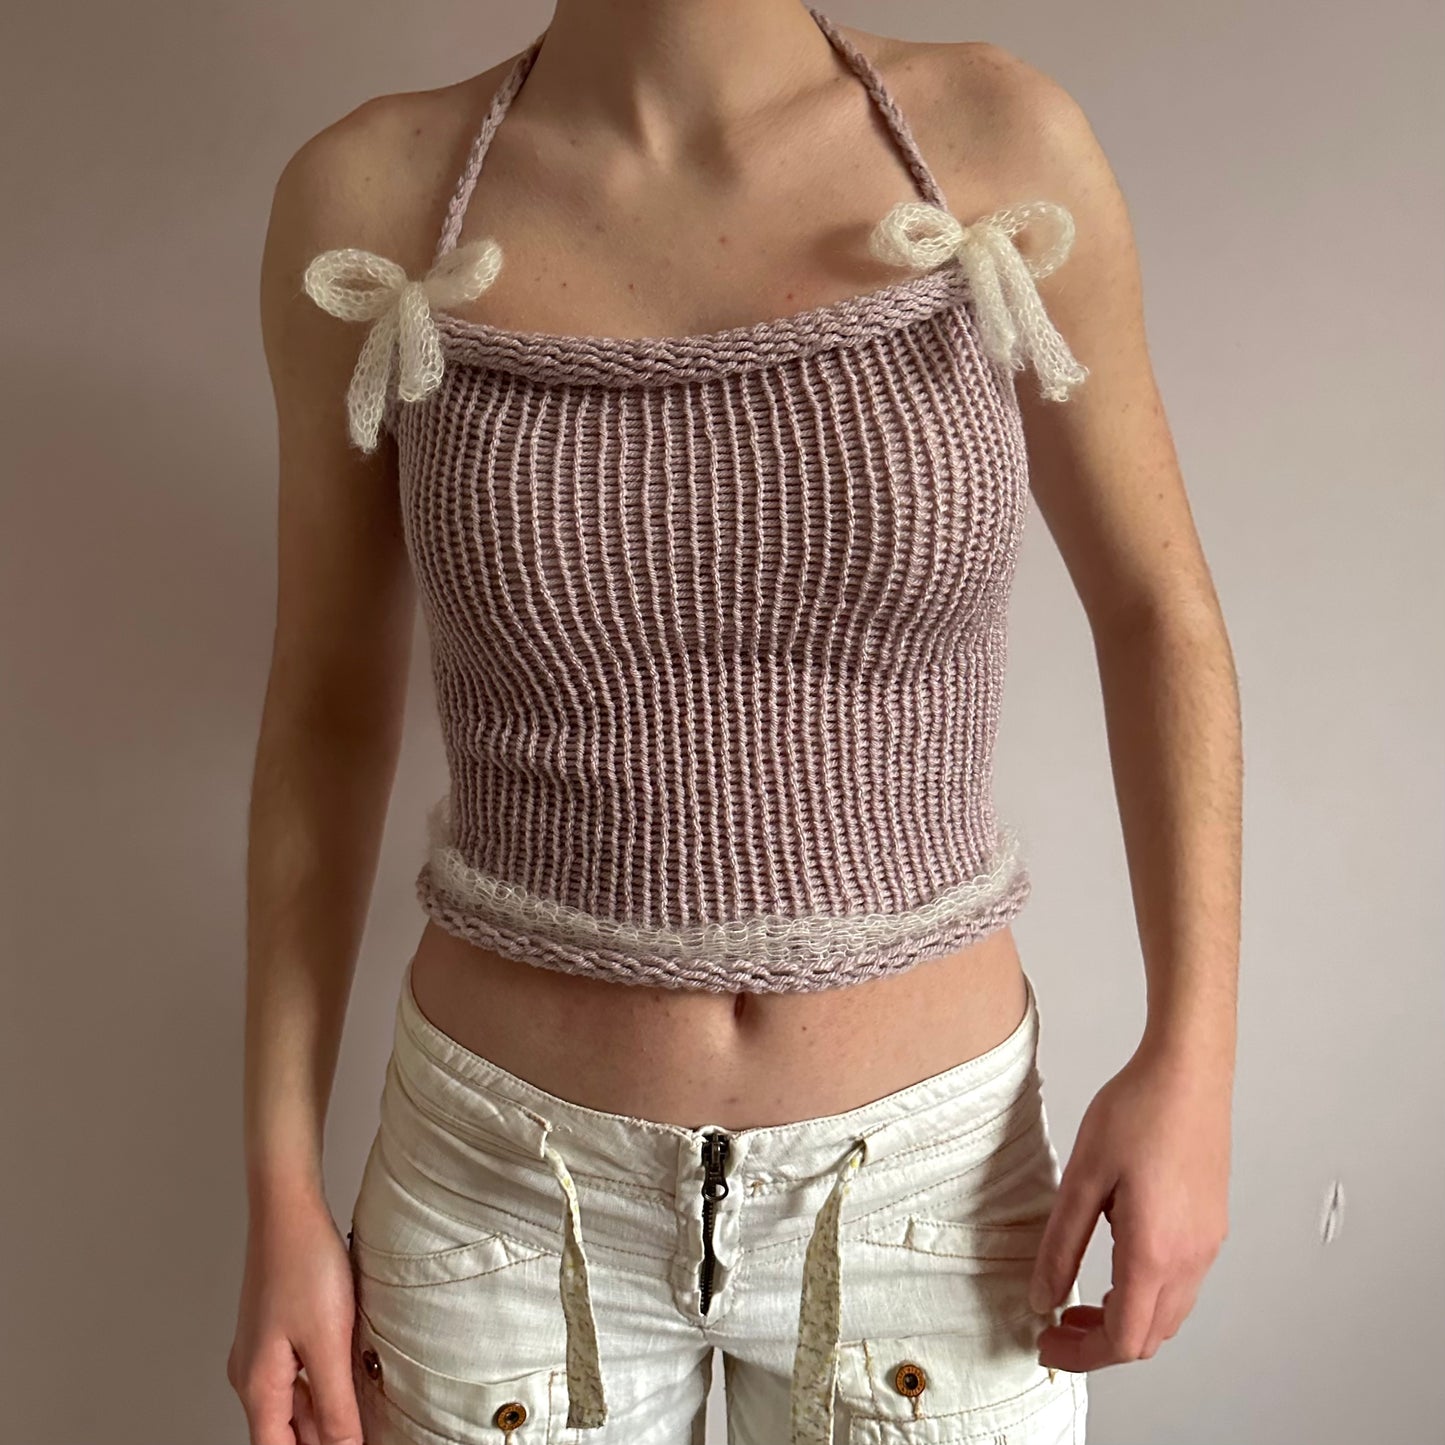 Handmade knitted mohair bow top in dusky pink and cream